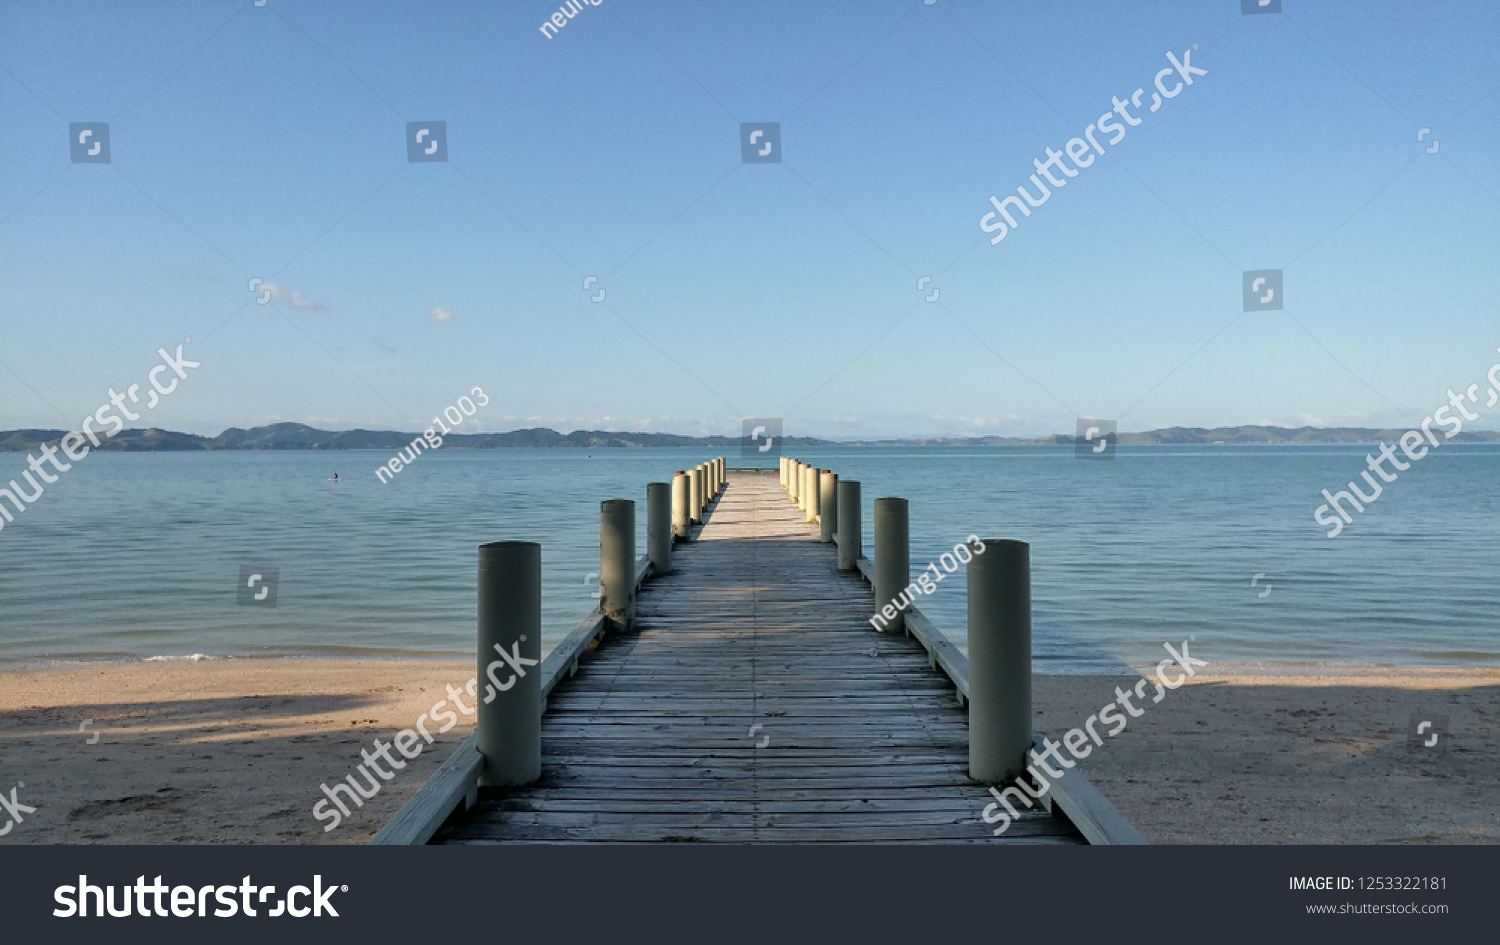 Jetty on the beach, Jetty to the sea #1253322181